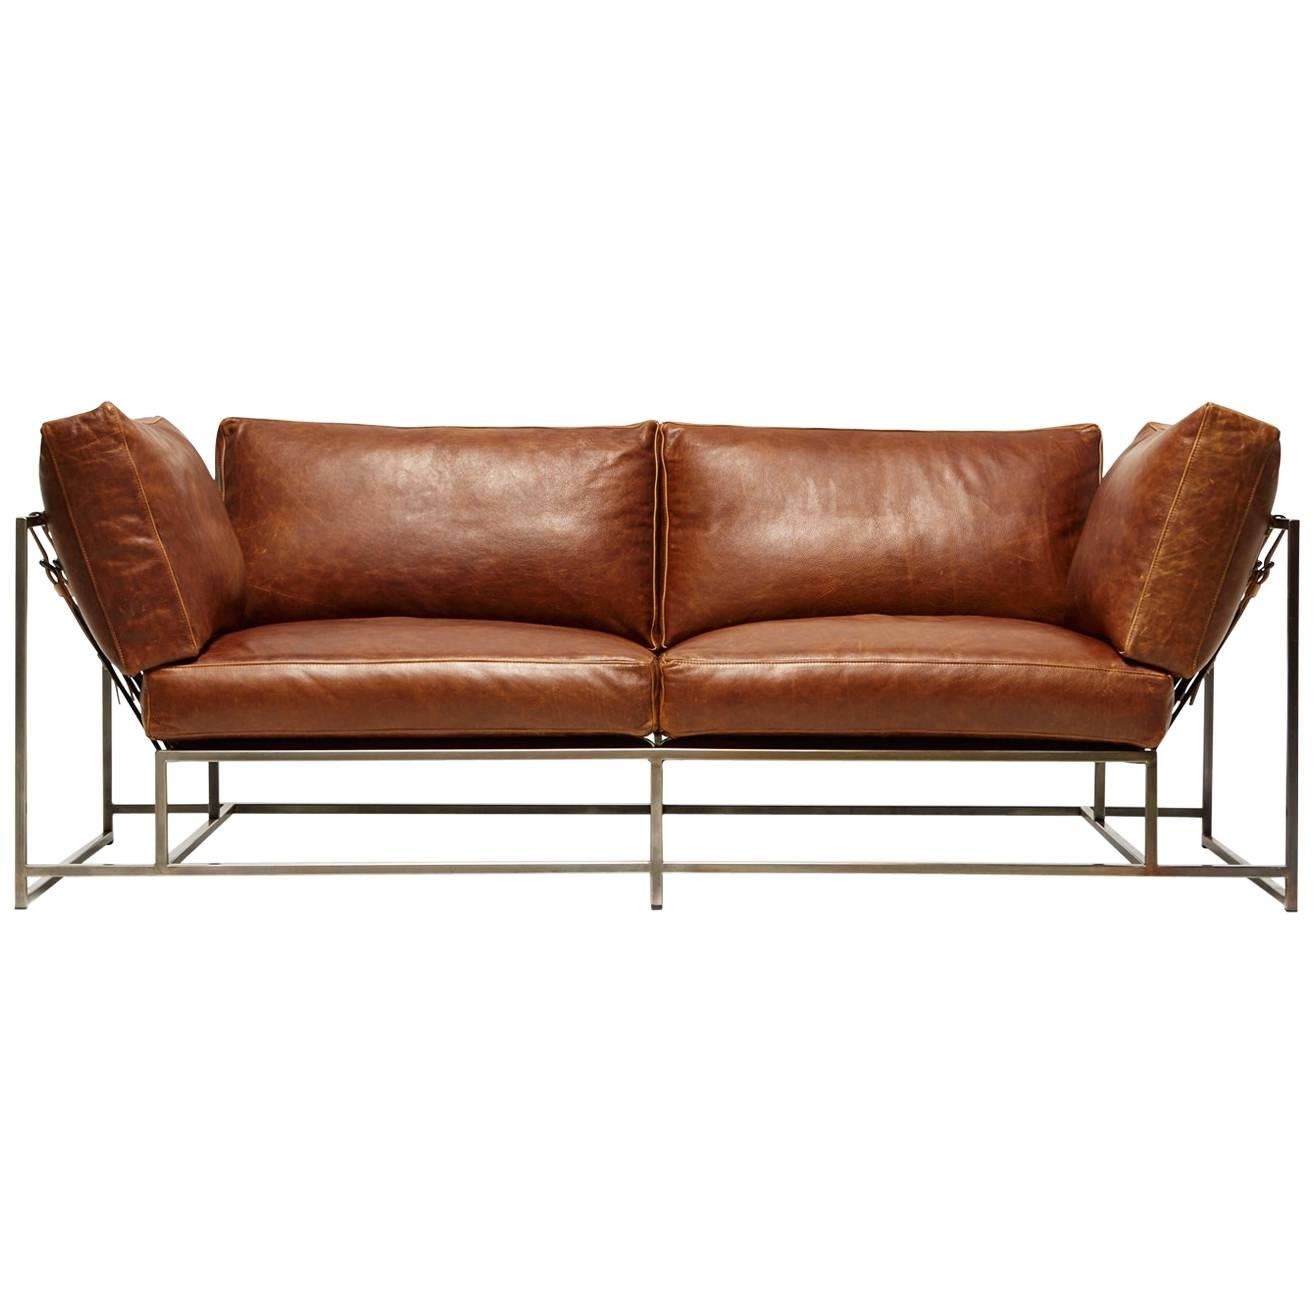 Potomac Leather and Antique Nickel Two-Seat Sofa